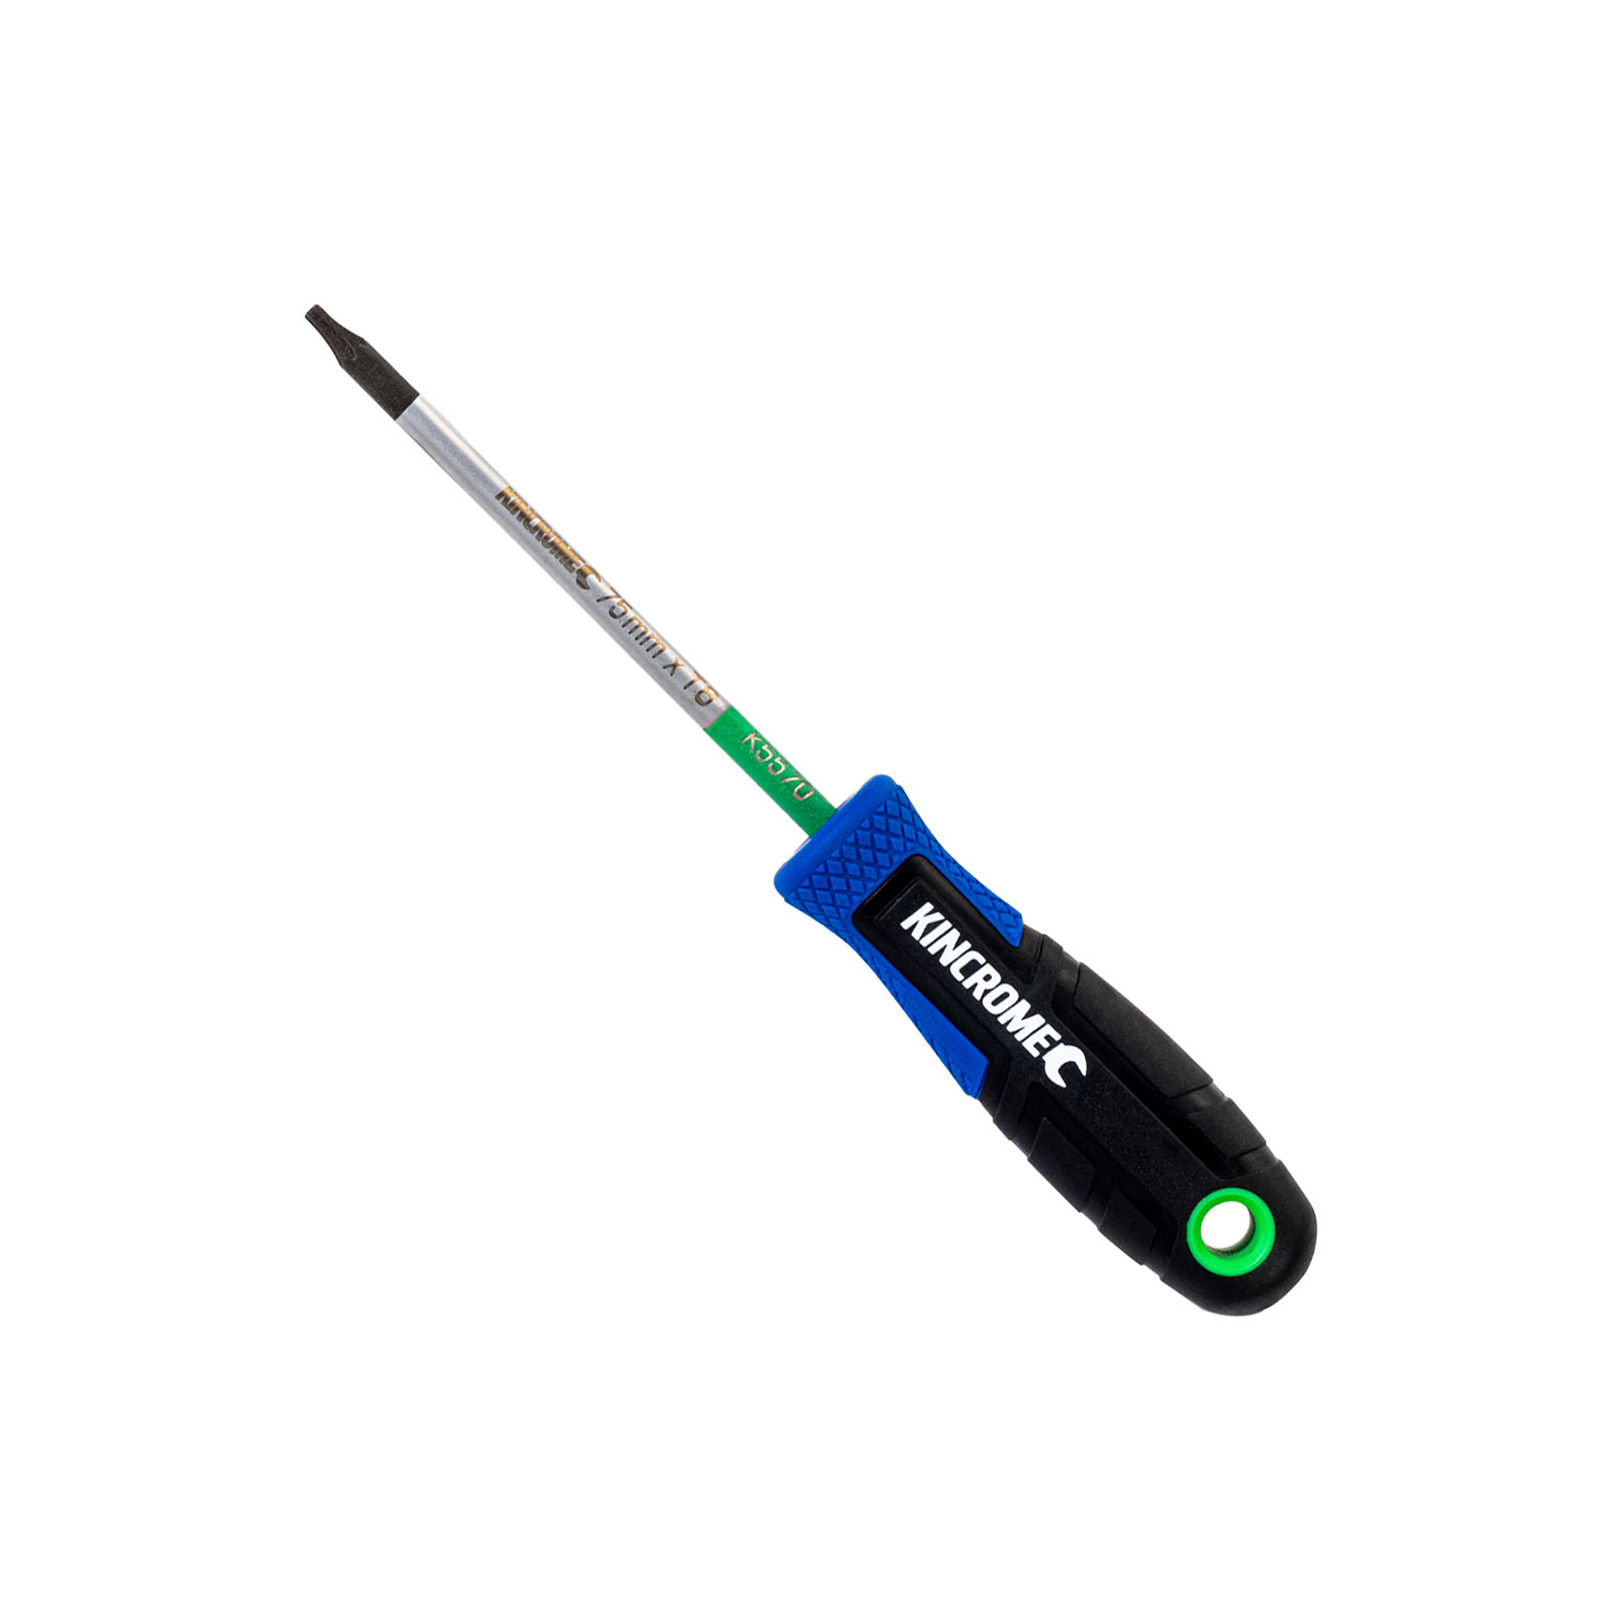 Heyco 4150008 Torx Screwdriver with Acetate Handle, T8